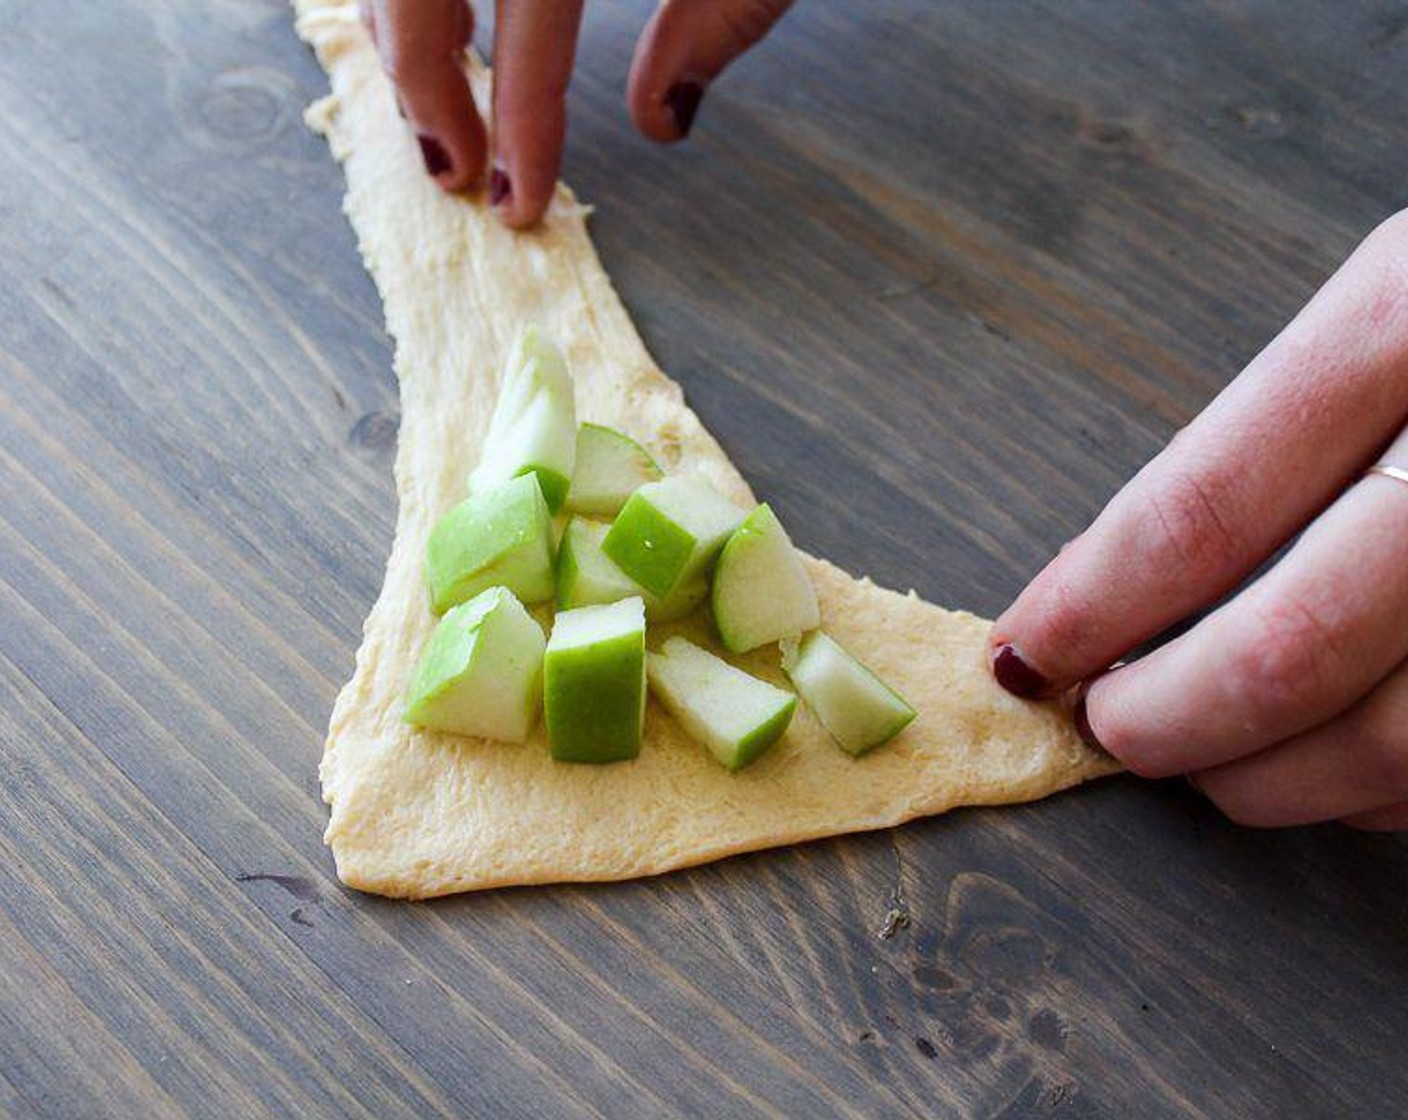 step 4 Carefully unroll the Crescent Roll Dough (2 pckg) and separate into triangles. Place a small handful of apple pieces, about 2 tablespoons per triangle, in the center of each crescent.